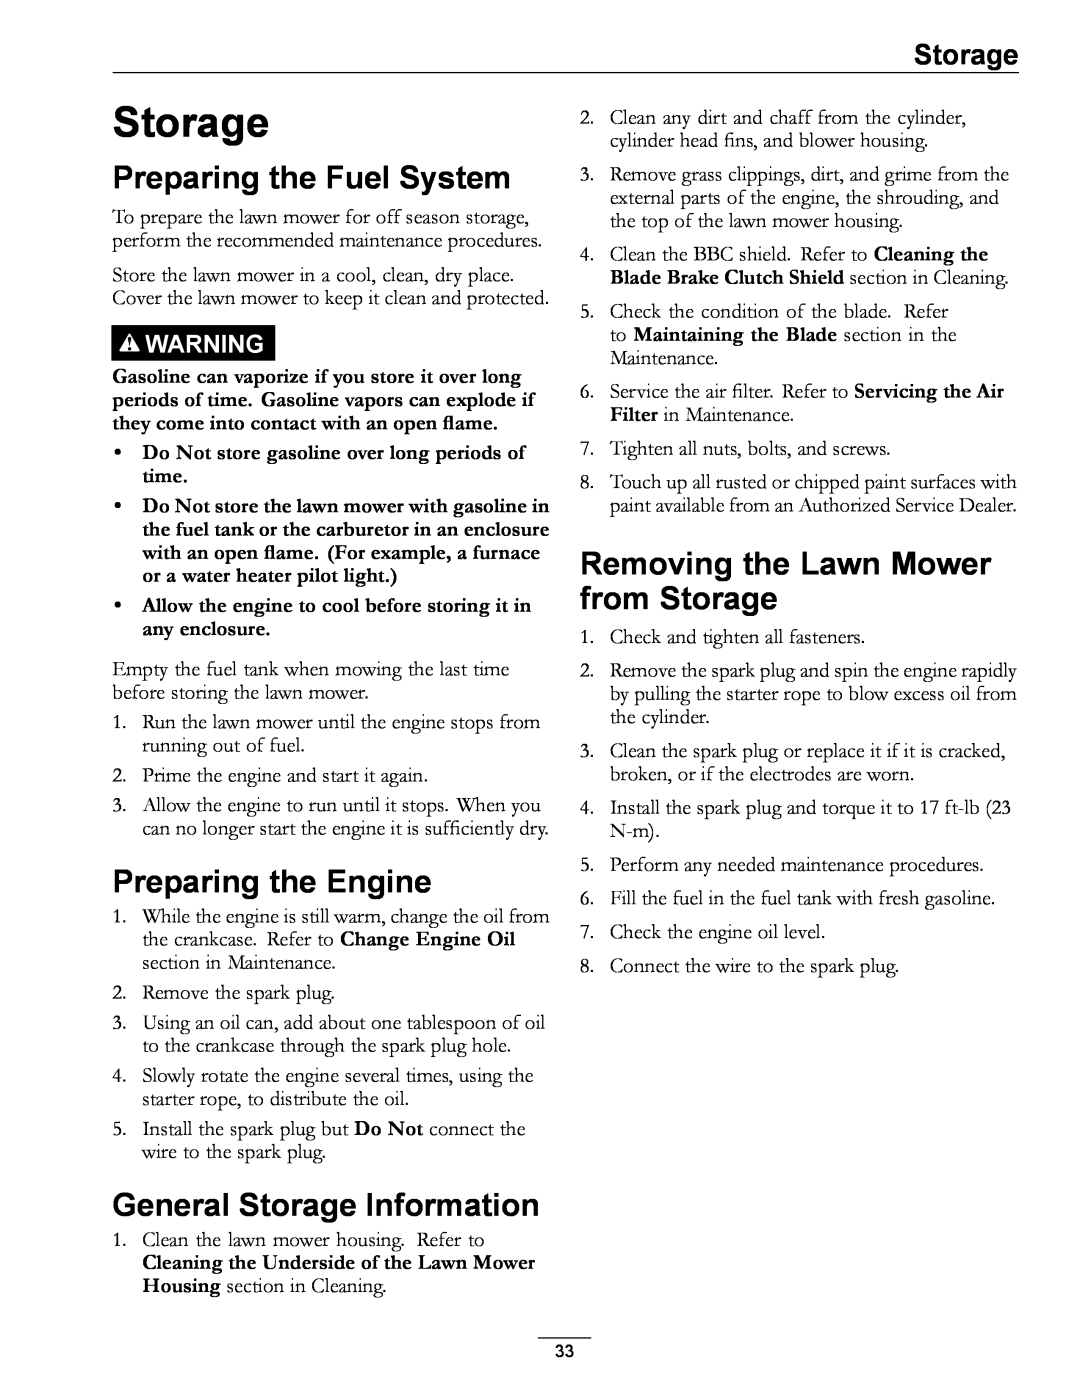 Exmark COMMERCIAL 21 manual Preparing the Fuel System, Preparing the Engine, General Storage Information 